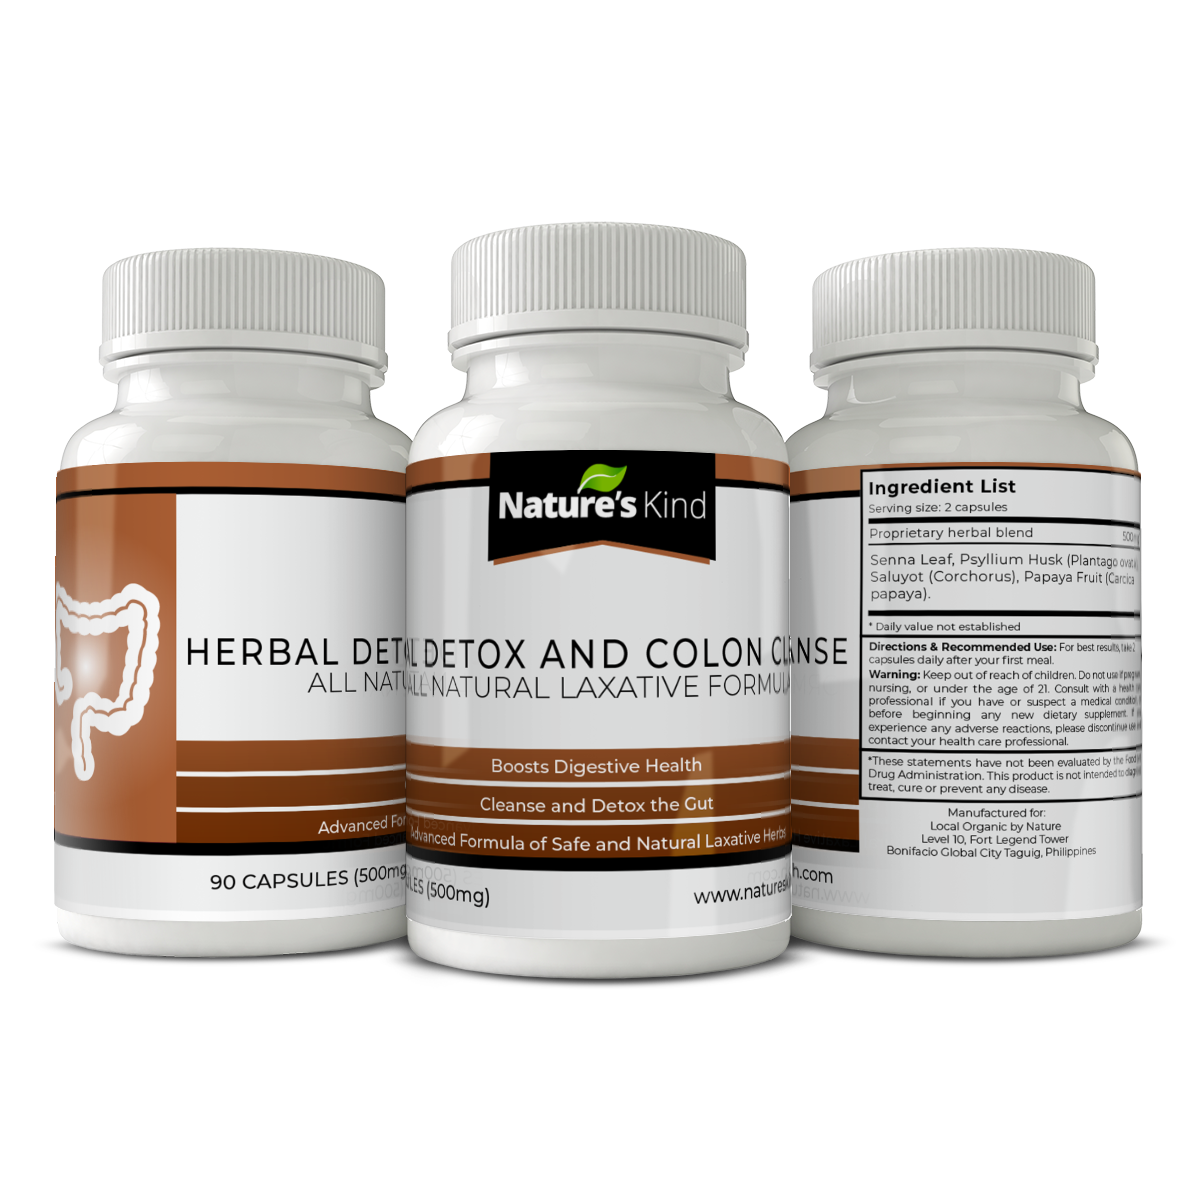 Colon Cleanse Herbal Detox - Safe, Effective and All Natural